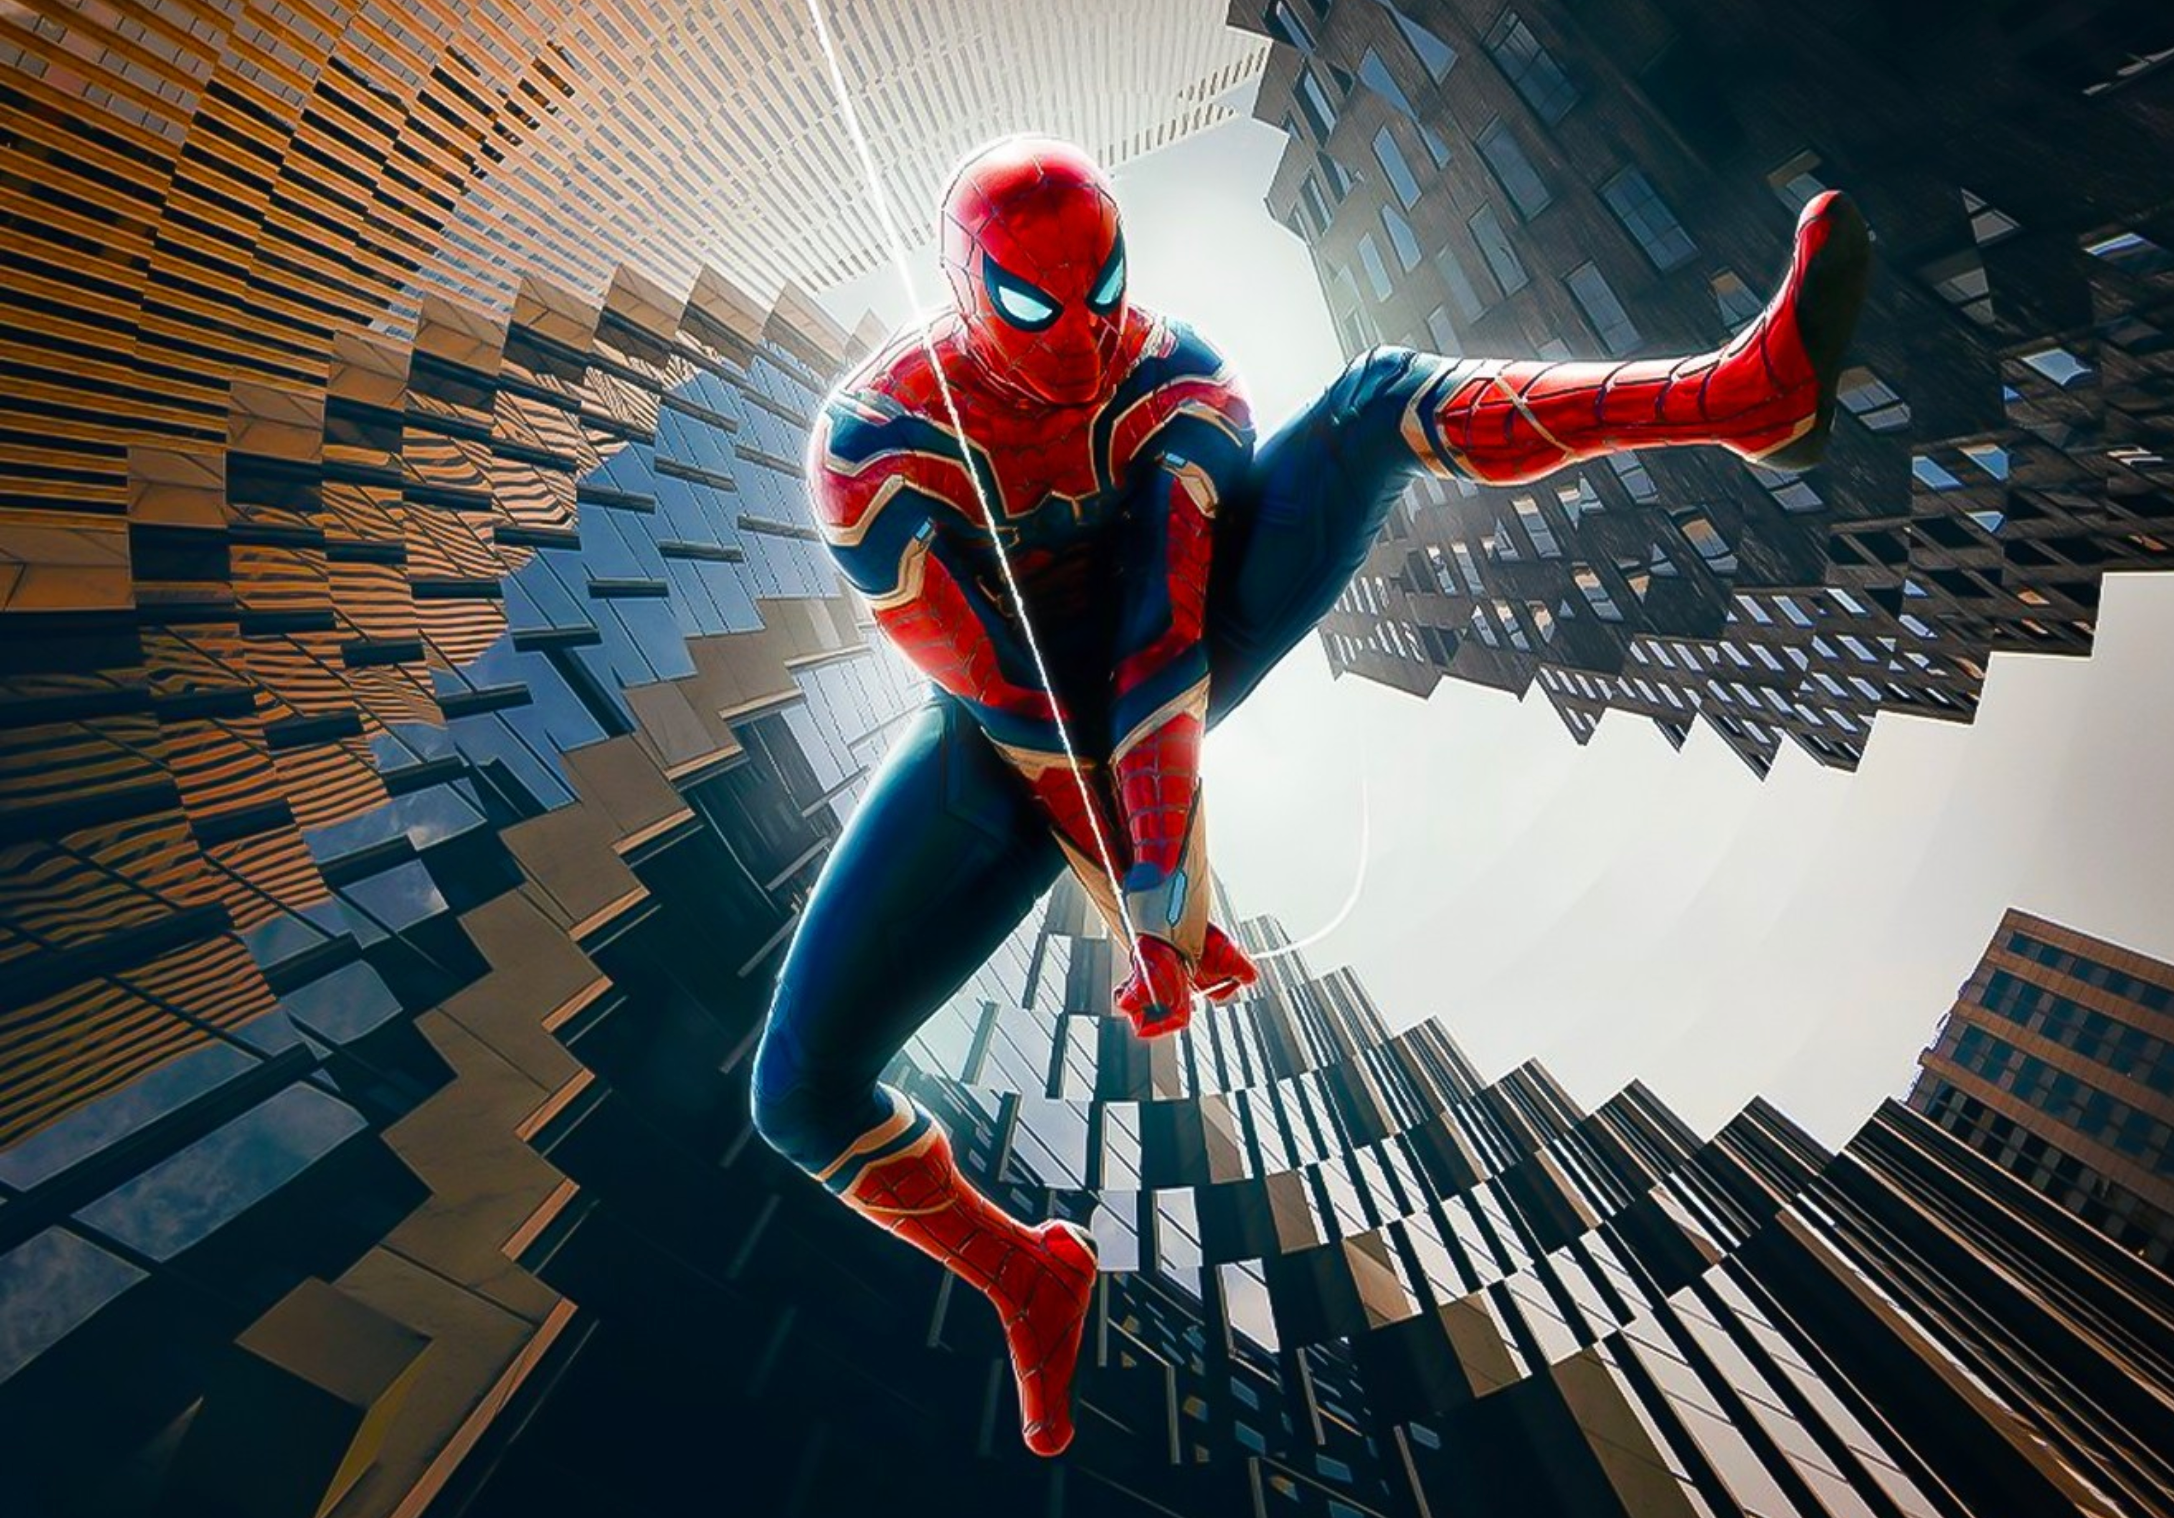 'Spider-Man: No Way Home' Surpasses $600M USD in North America Box Office